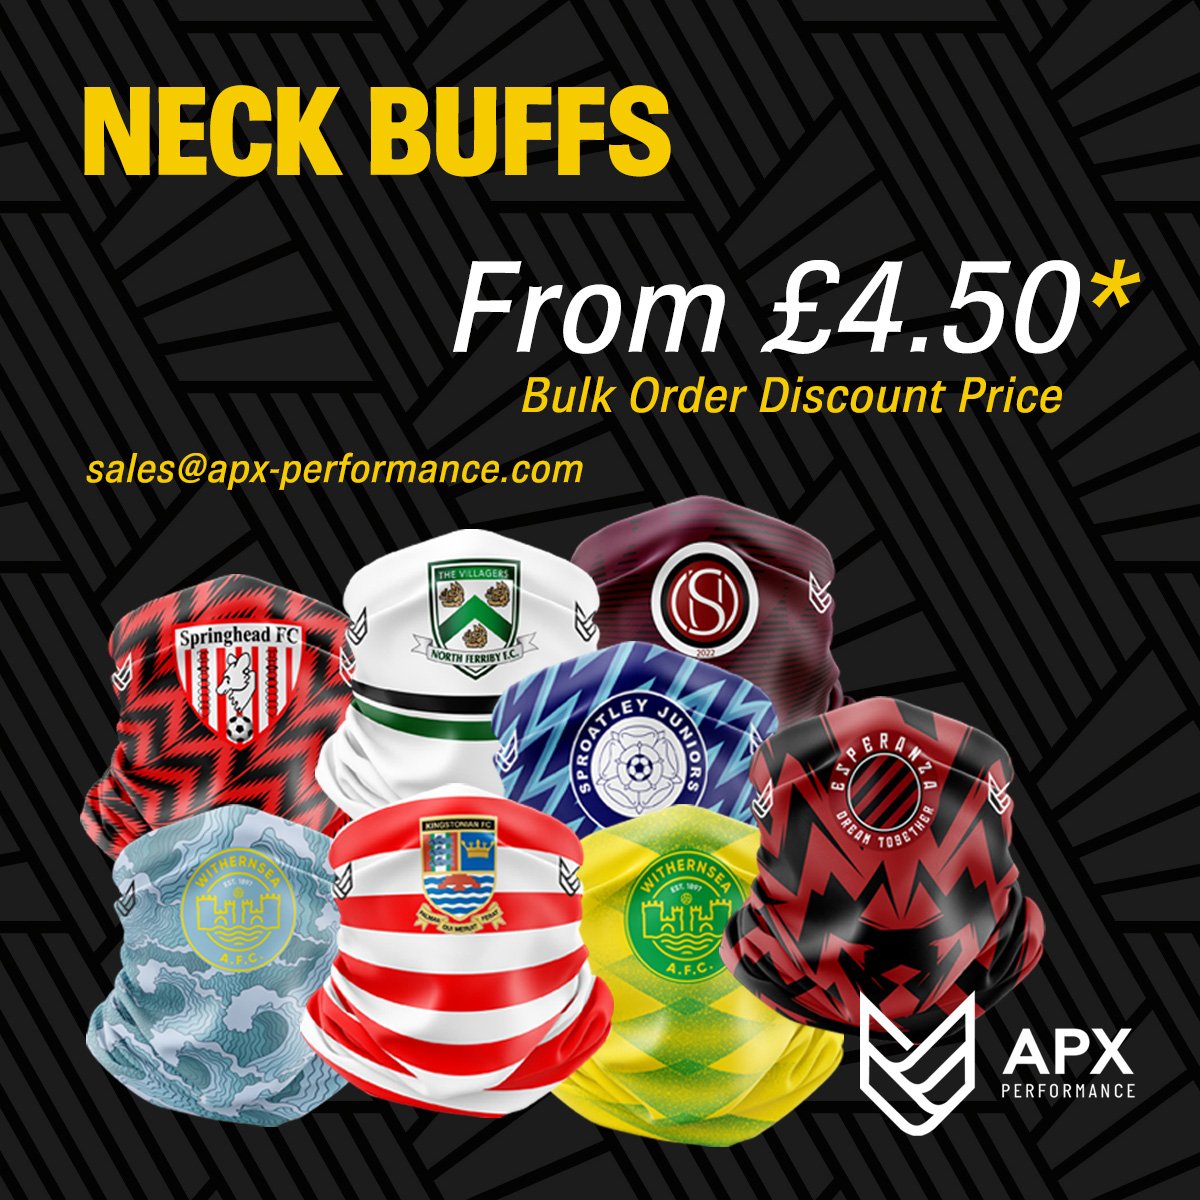 Are your players feeling the chill during training and games? ❄️ Our sublimated neck buffs can be manufactured in any design for an amazing price and are produced using our premium Z fabric. 𝘀𝗮𝗹𝗲𝘀@𝗮𝗽𝘅-𝗽𝗲𝗿𝗳𝗼𝗿𝗺𝗮𝗻𝗰𝗲.𝗰𝗼𝗺 for details and designs